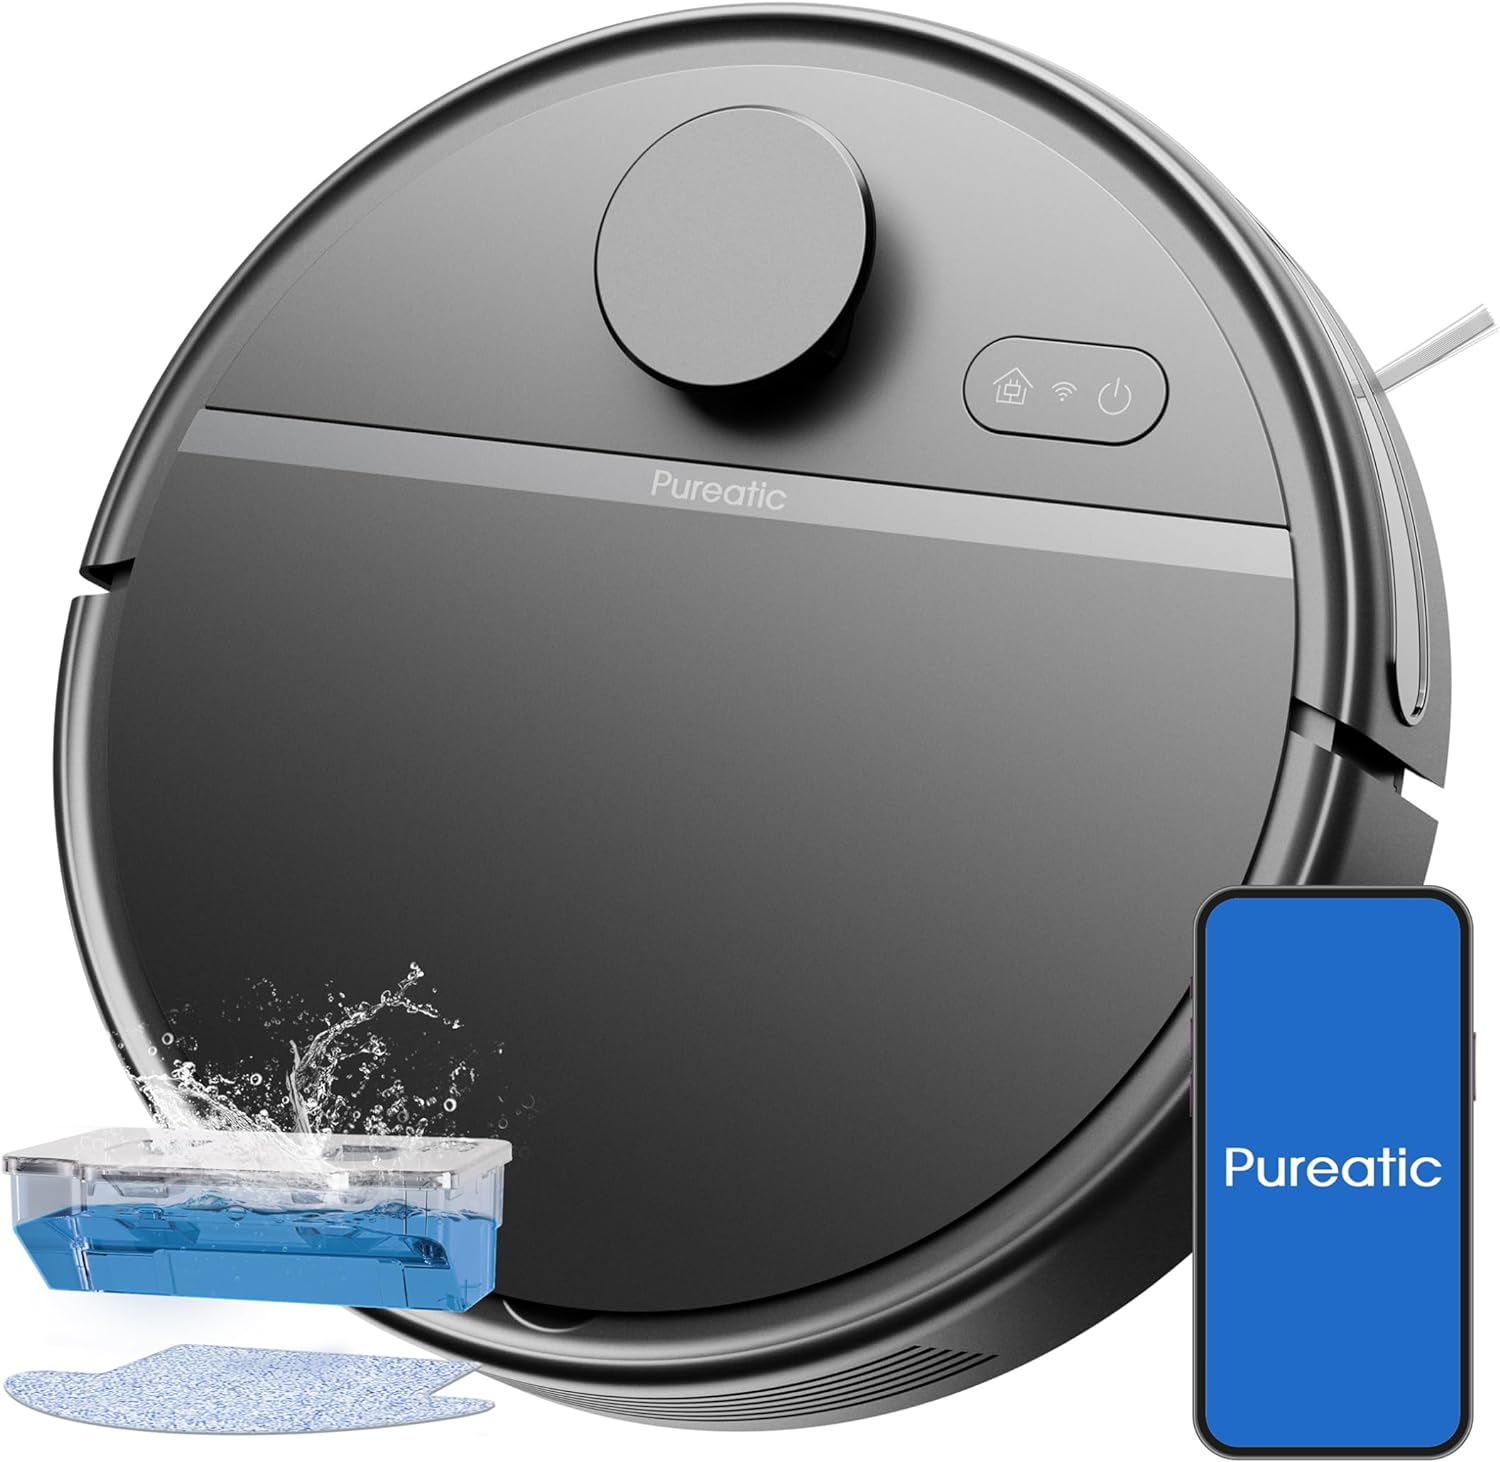 Pureatic N5 Robot Vacuum Review: Experience the Power and Efficiency